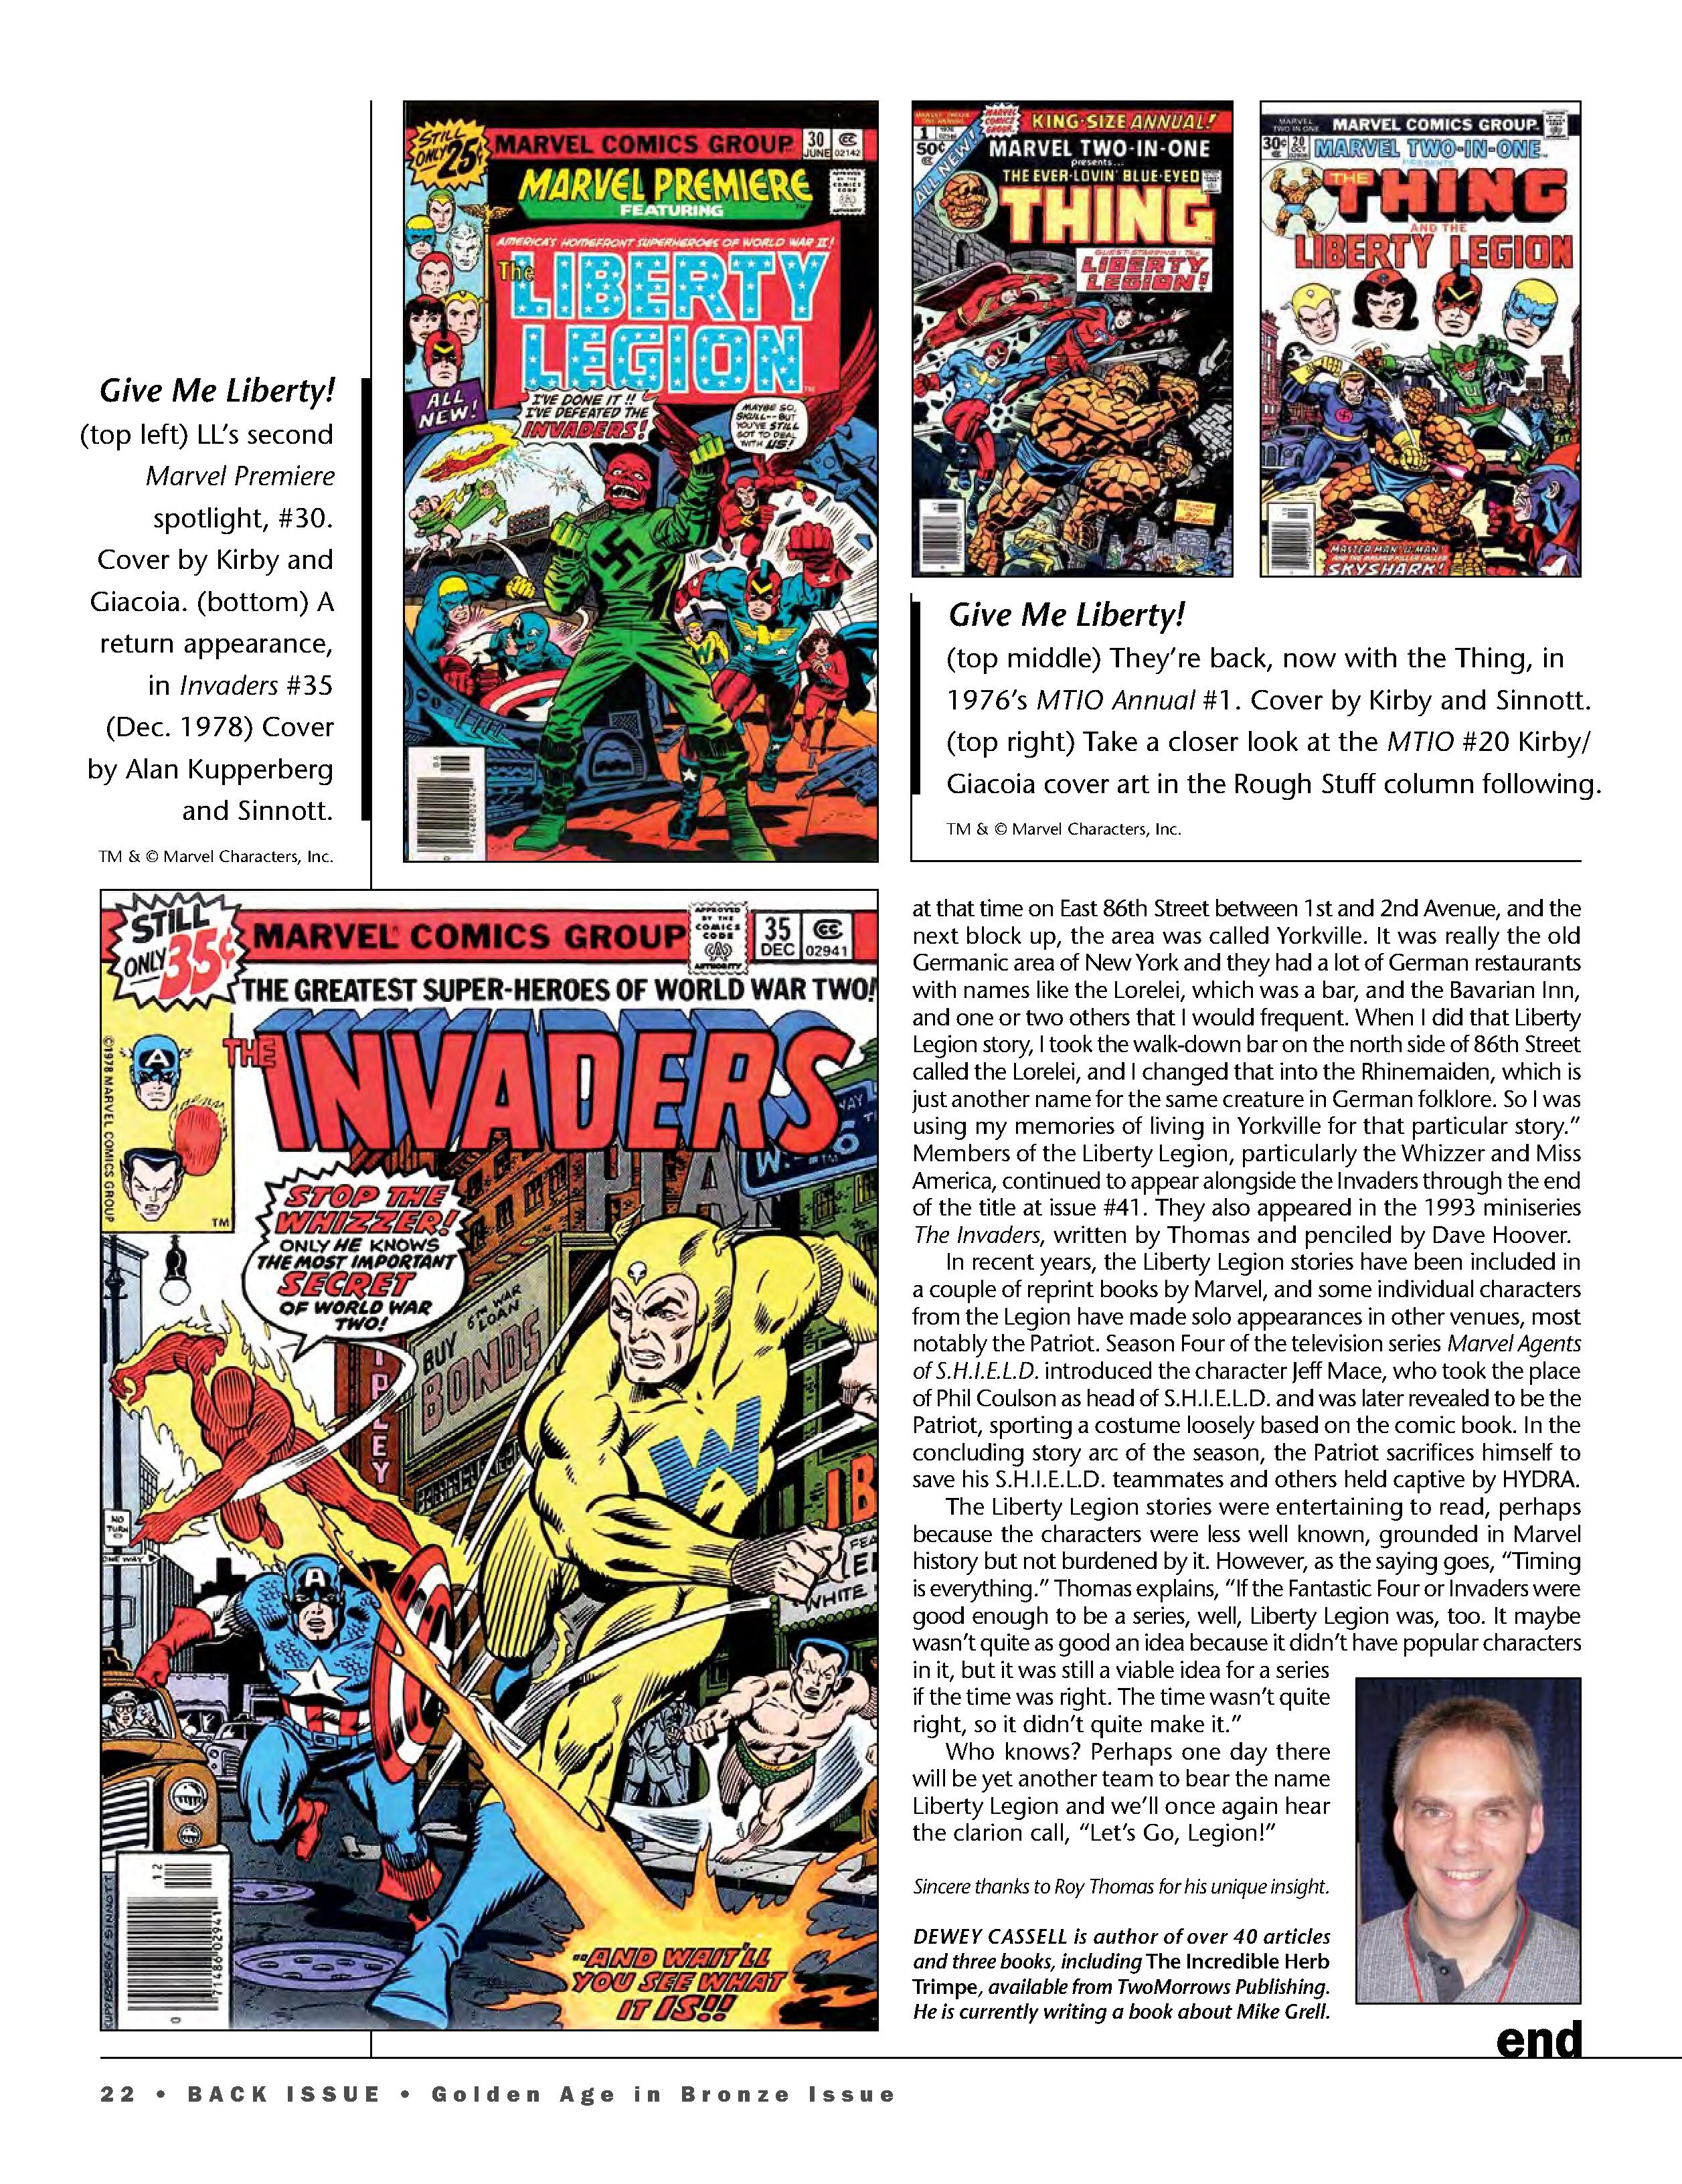 Read online Back Issue comic -  Issue #106 - 24